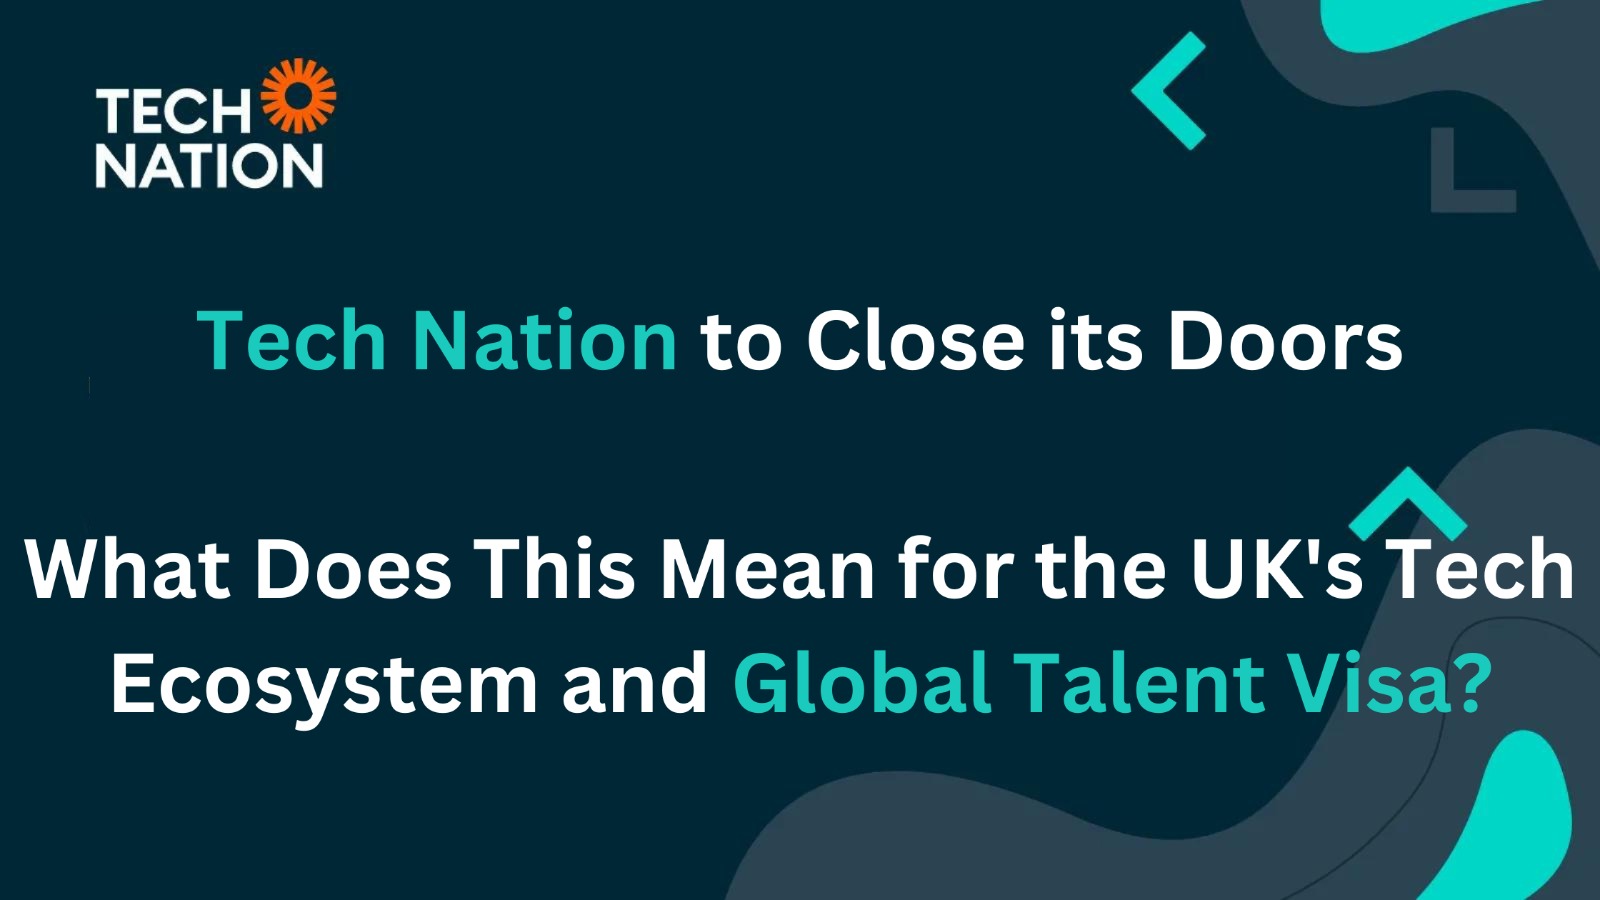 tech nation to close its doors what does this mean for the uk's tech ecosystem and global talent visa?